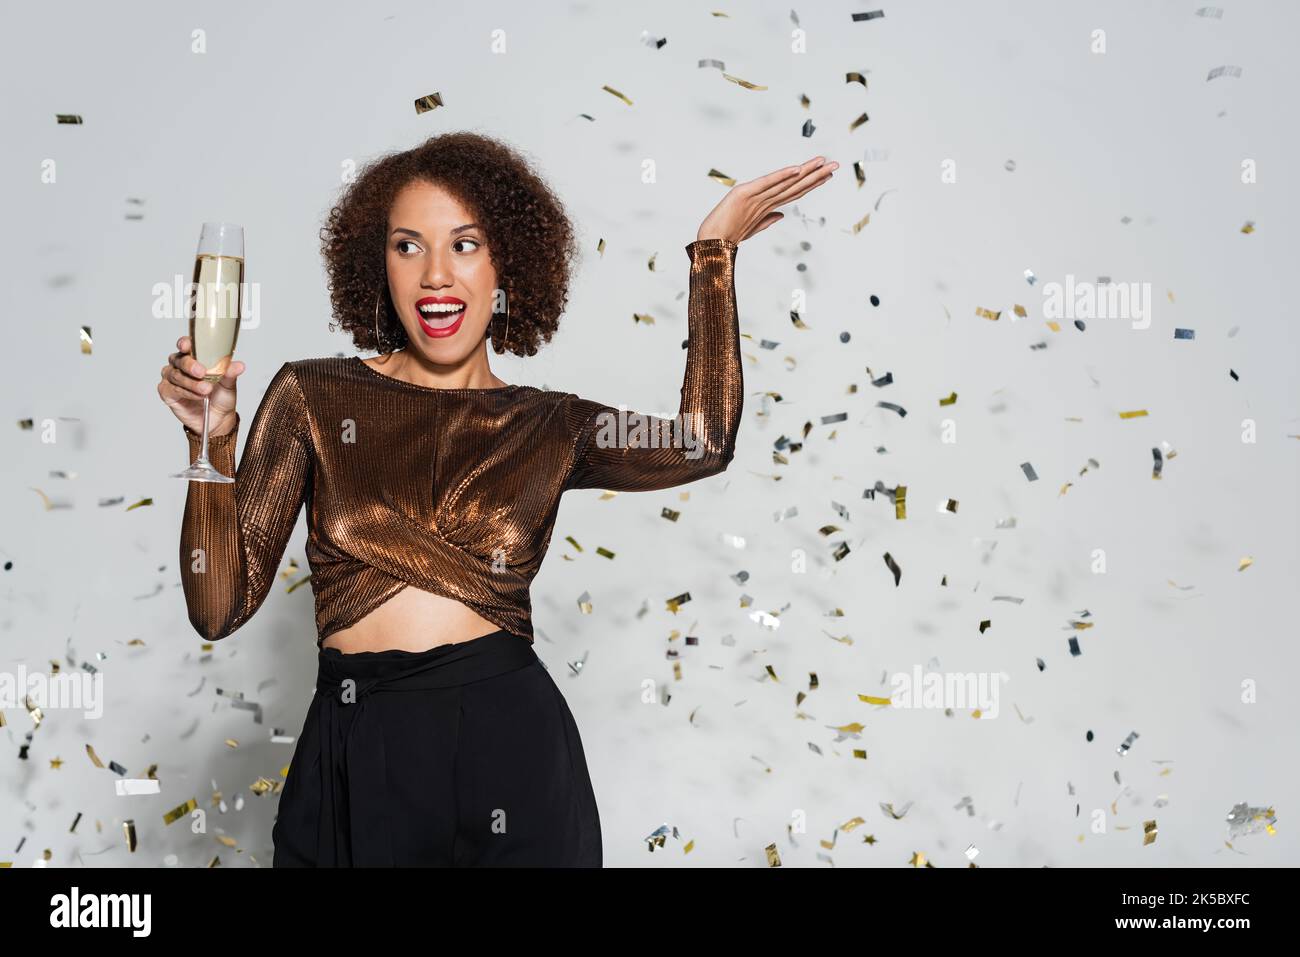 excited african american woman in festive clothes posing with champagne glass near confetti on grey background,stock image Stock Photo